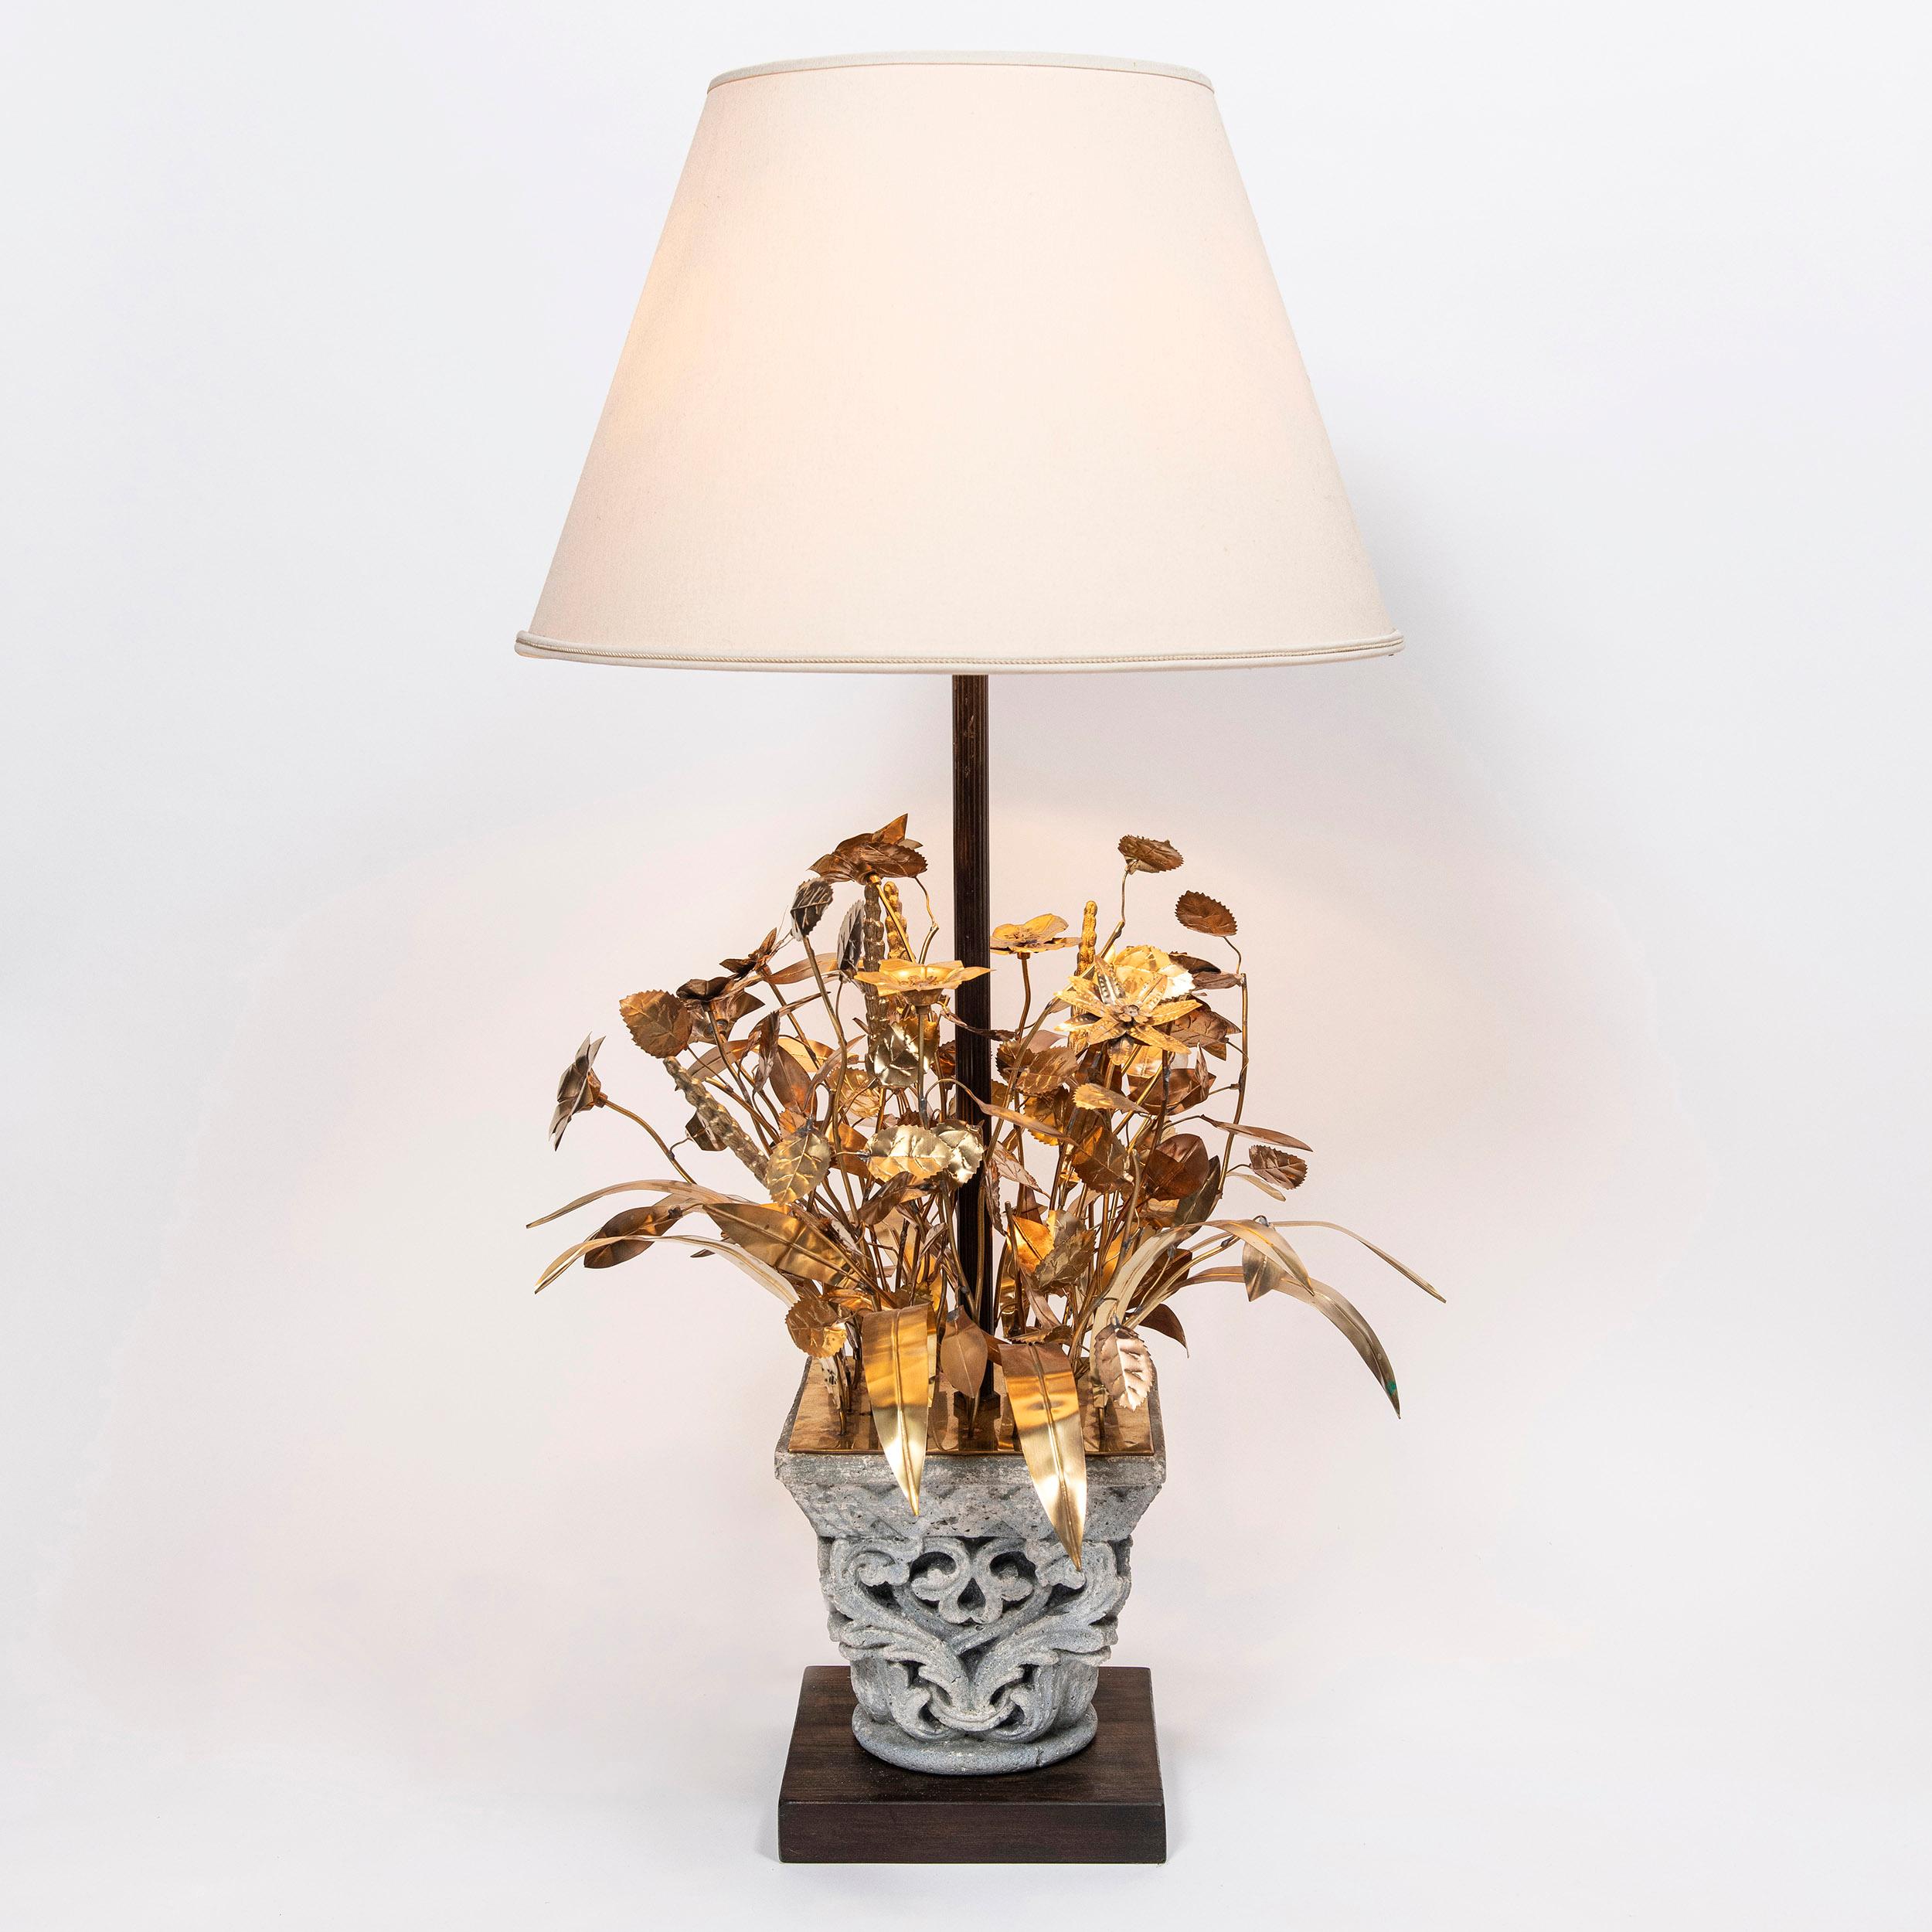 Pair of bronze and paris stone table lamps. Attributed to Maison Jansen, France, circa 1950.